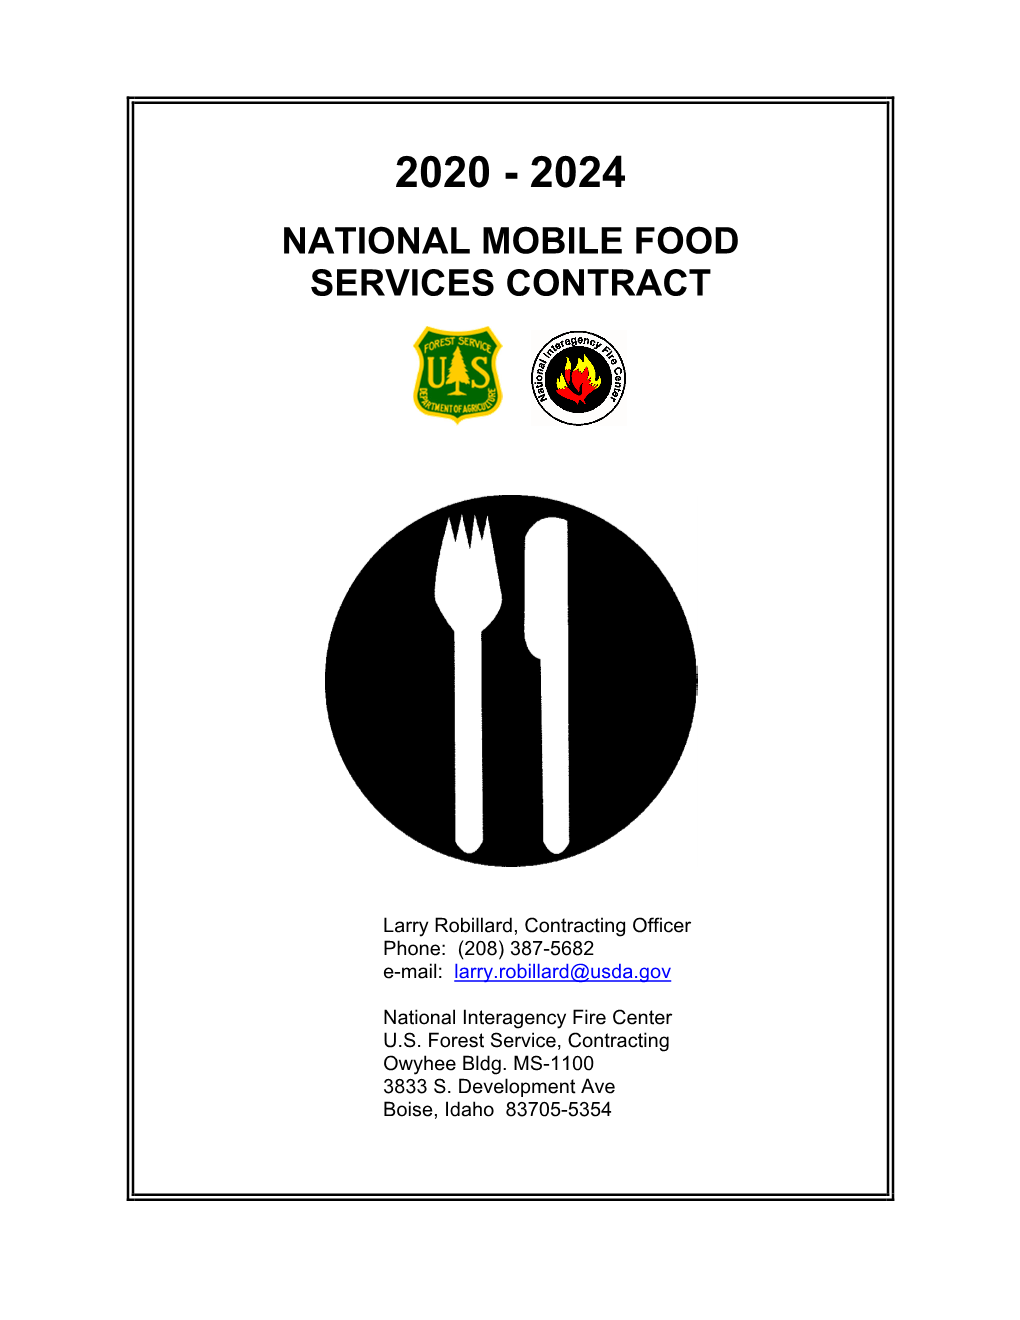 National Mobile Food Services Contract